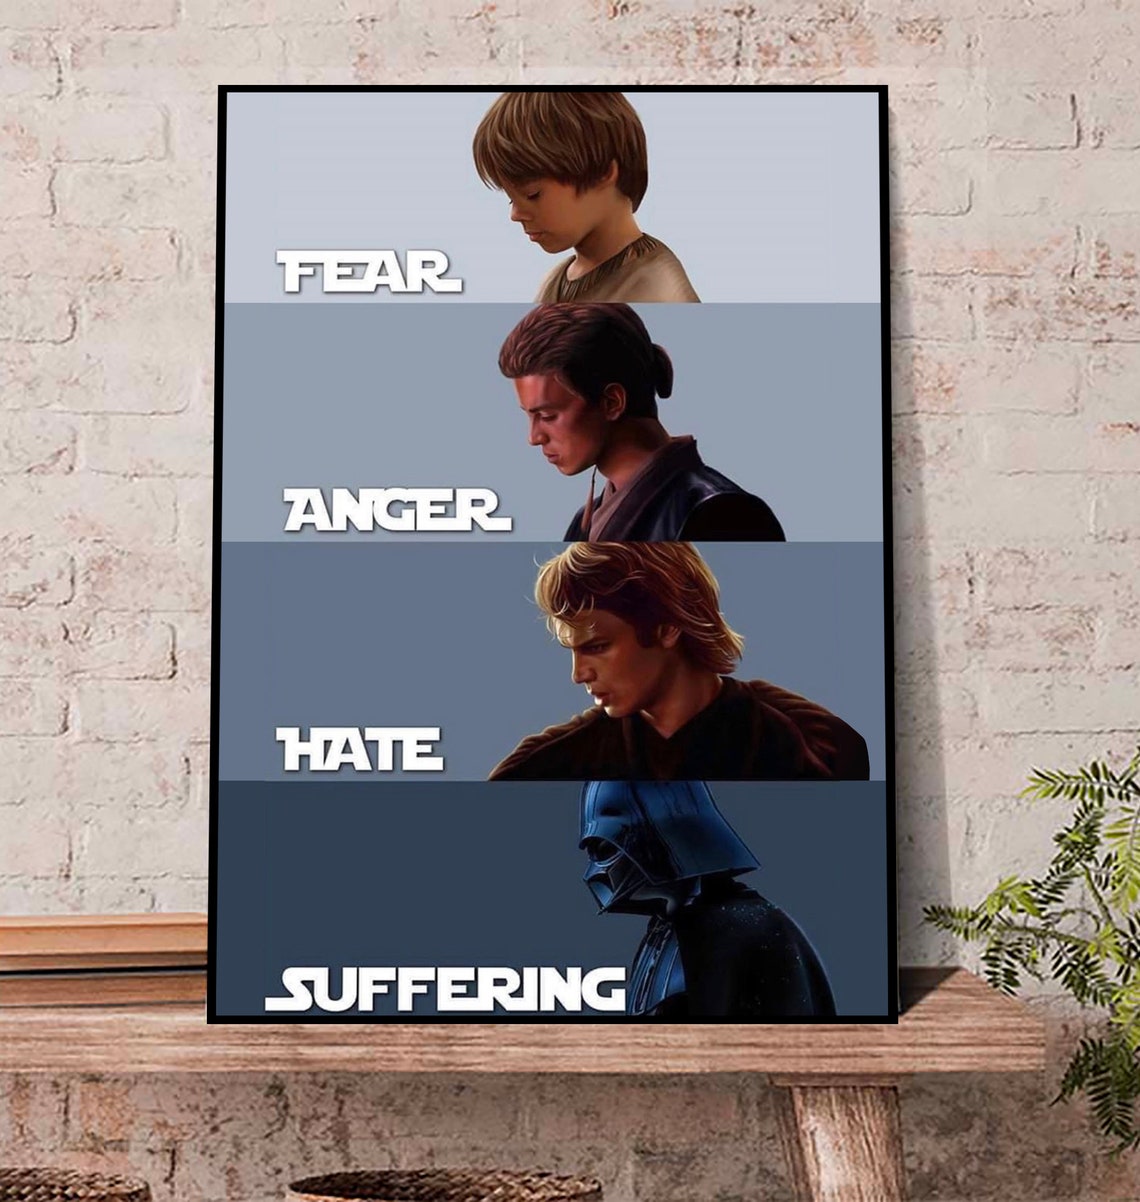 Fear Anger Hate Suffering Canvas Poster, Star Wars Quote Poster, Star Wars – fear leads to anger Poster with  inches